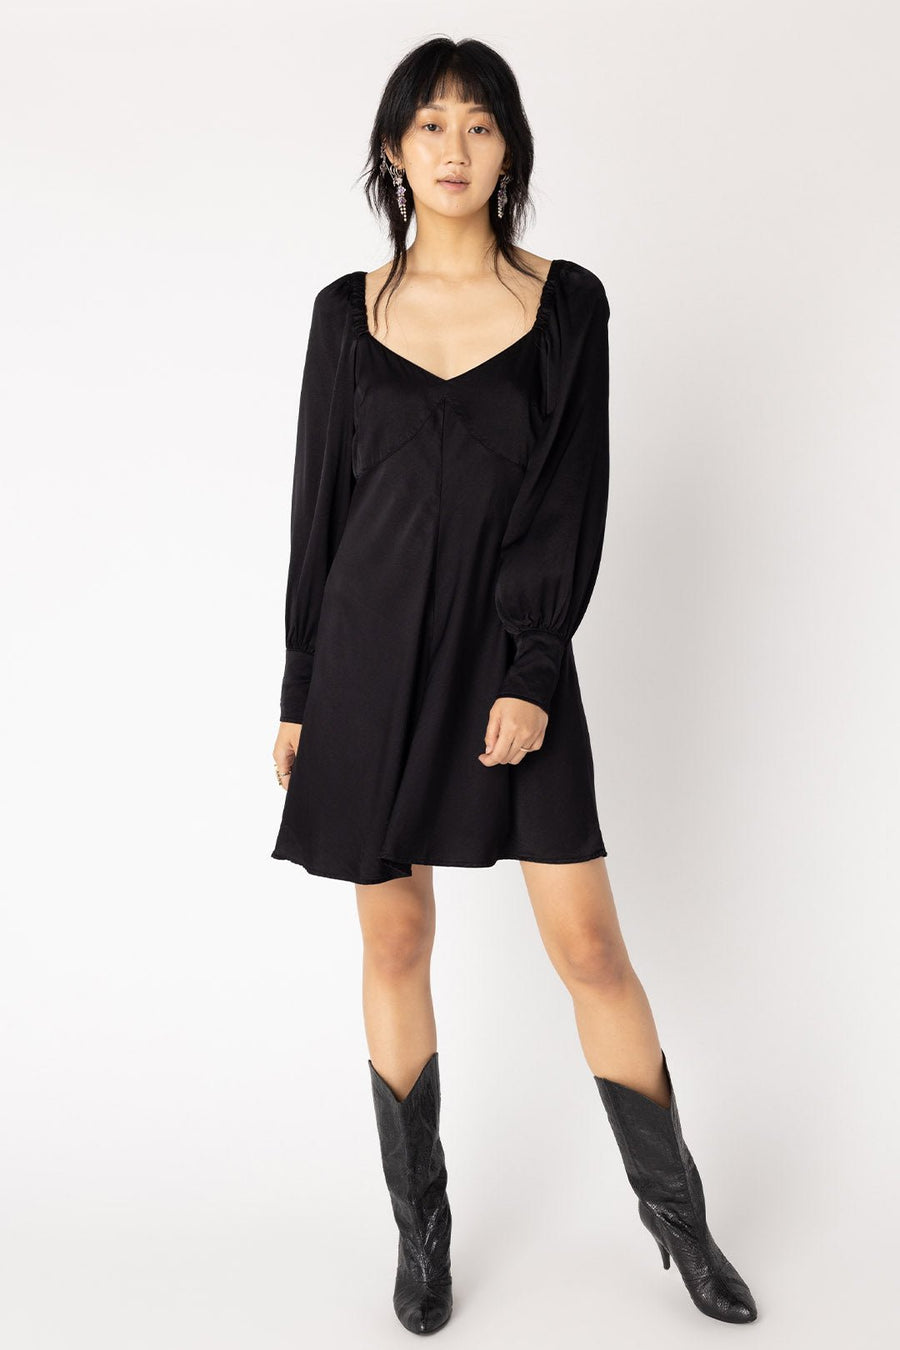 HANOVER ROMANTIC DRESS, WASHED BLACK - Burning Torch Online Boutique